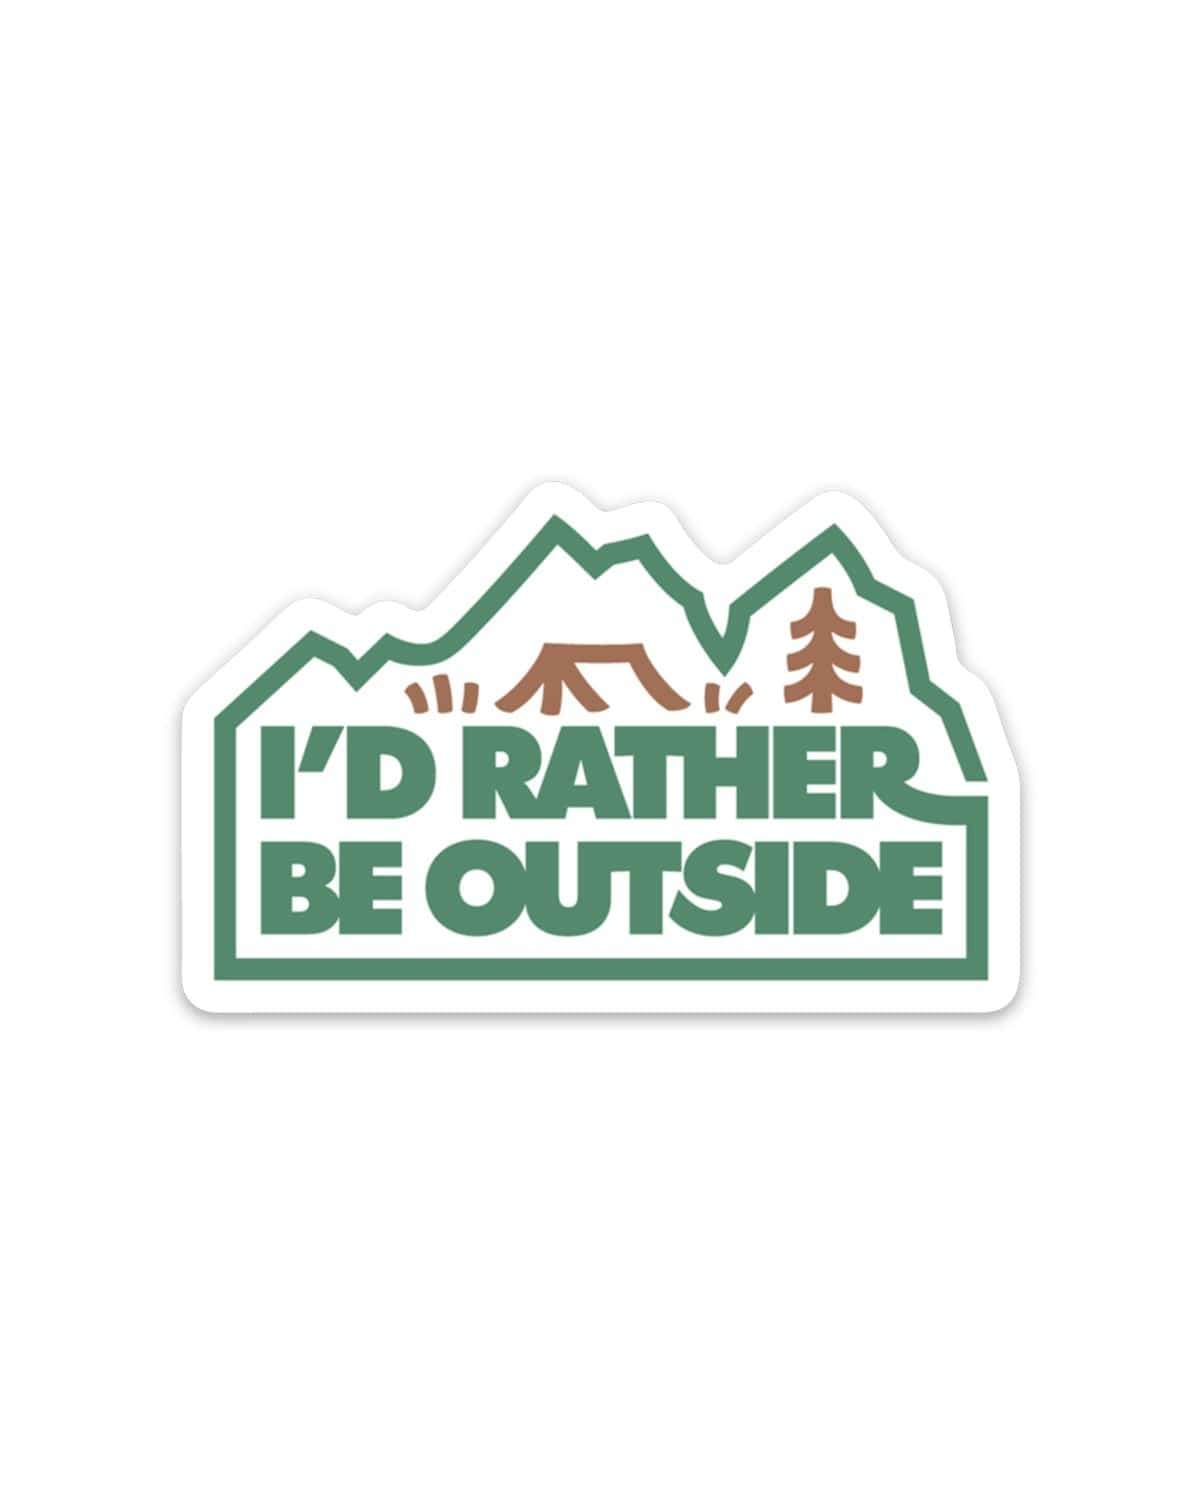 I'd Rather Be Outside | Forest Sticker - Keep Nature Wild